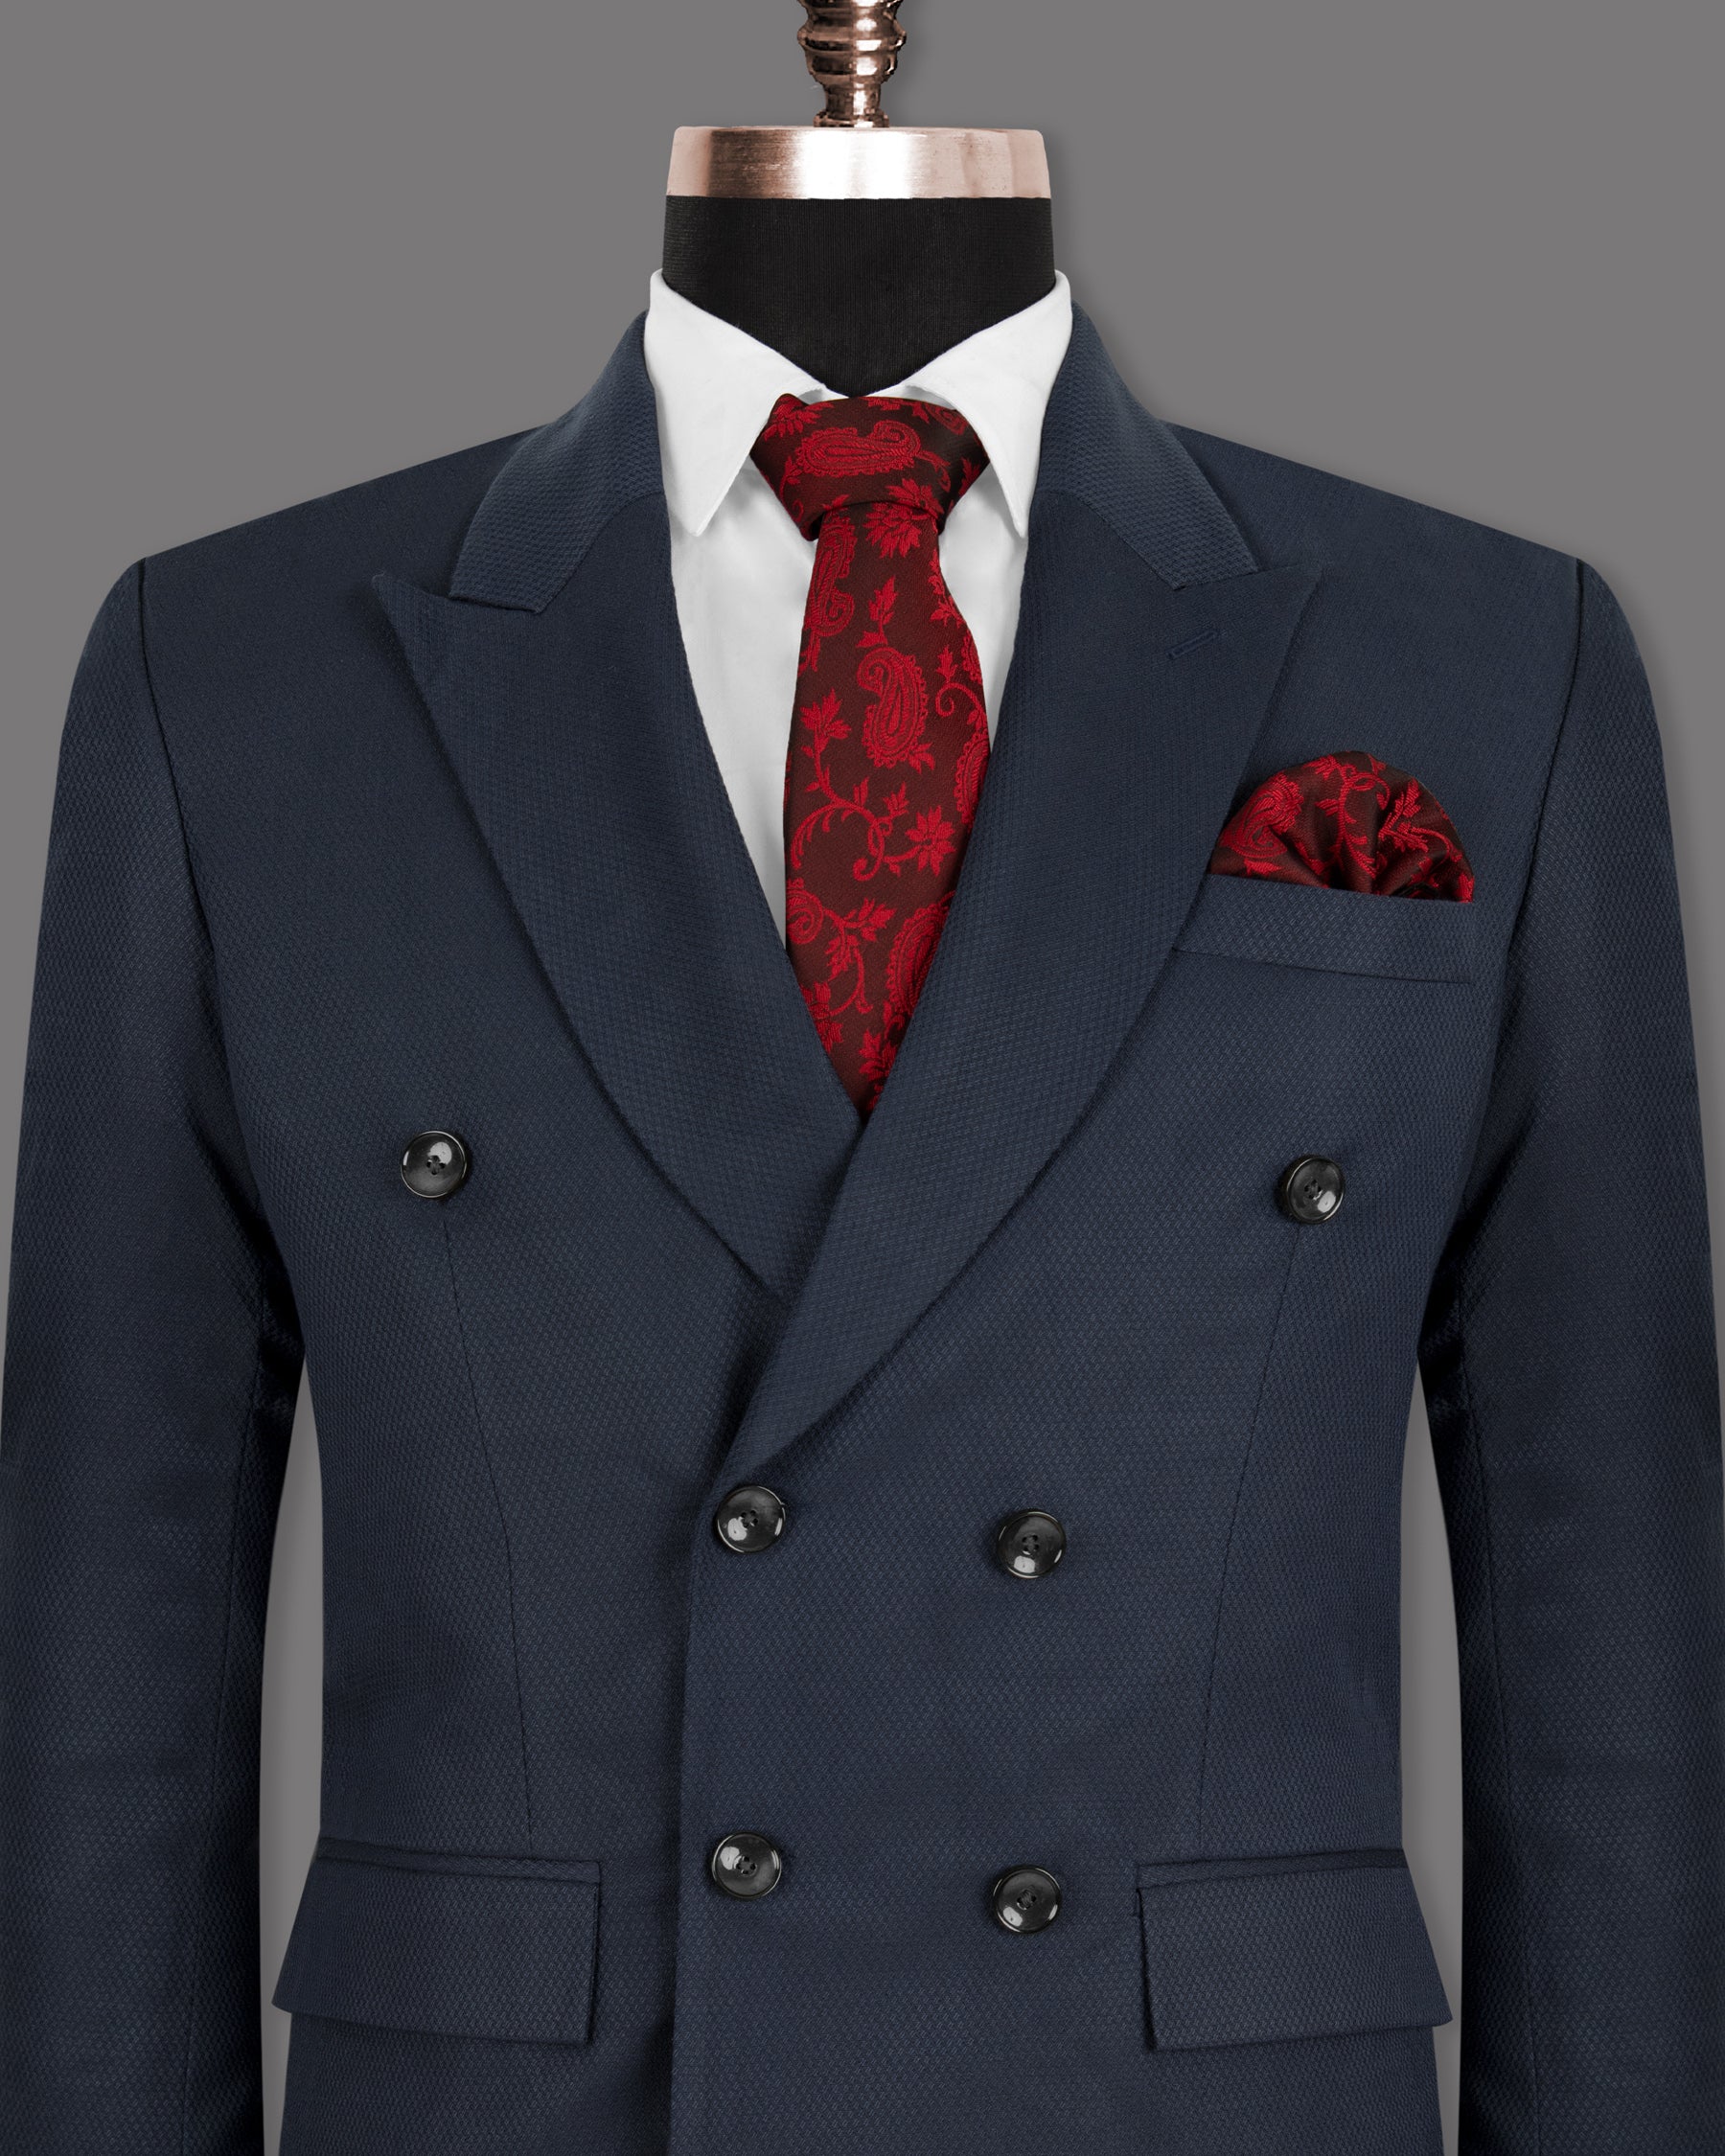 Royal Blue Wool-rich Double-breasted Sports Blazer BL1141-DB-40, BL1141-DB-42, BL1141-DB-44, BL1141-DB-46, BL1141-DB-50, BL1141-DB-56, BL1141-DB-58, BL1141-DB-38, BL1141-DB-36, BL1141-DB-48, BL1141-DB-54, BL1141-DB-60, BL1141-DB-52